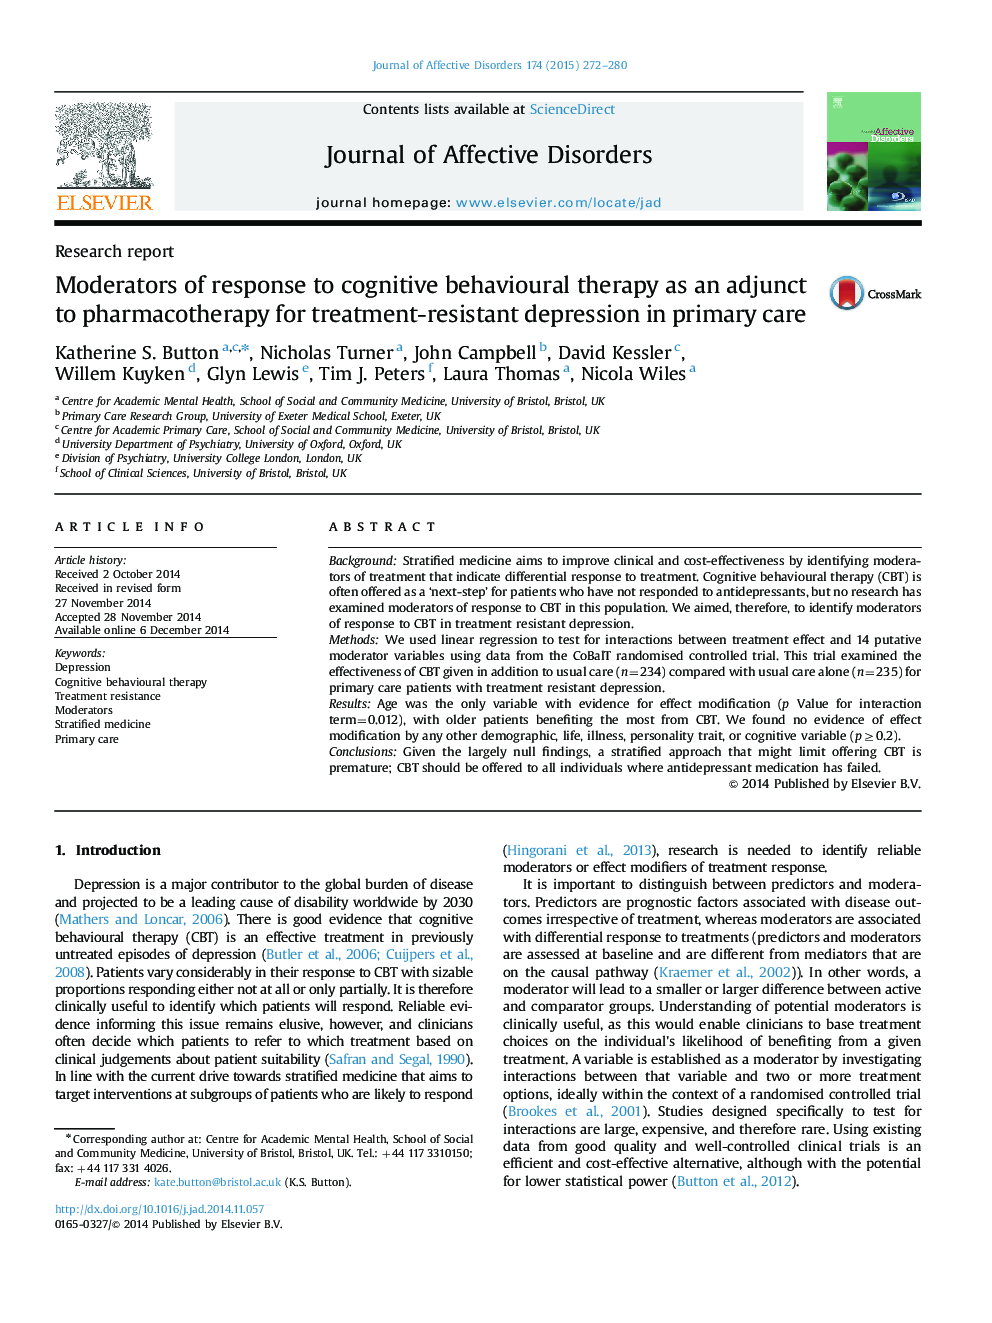 Moderators of response to cognitive behavioural therapy as an adjunct to pharmacotherapy for treatment-resistant depression in primary care